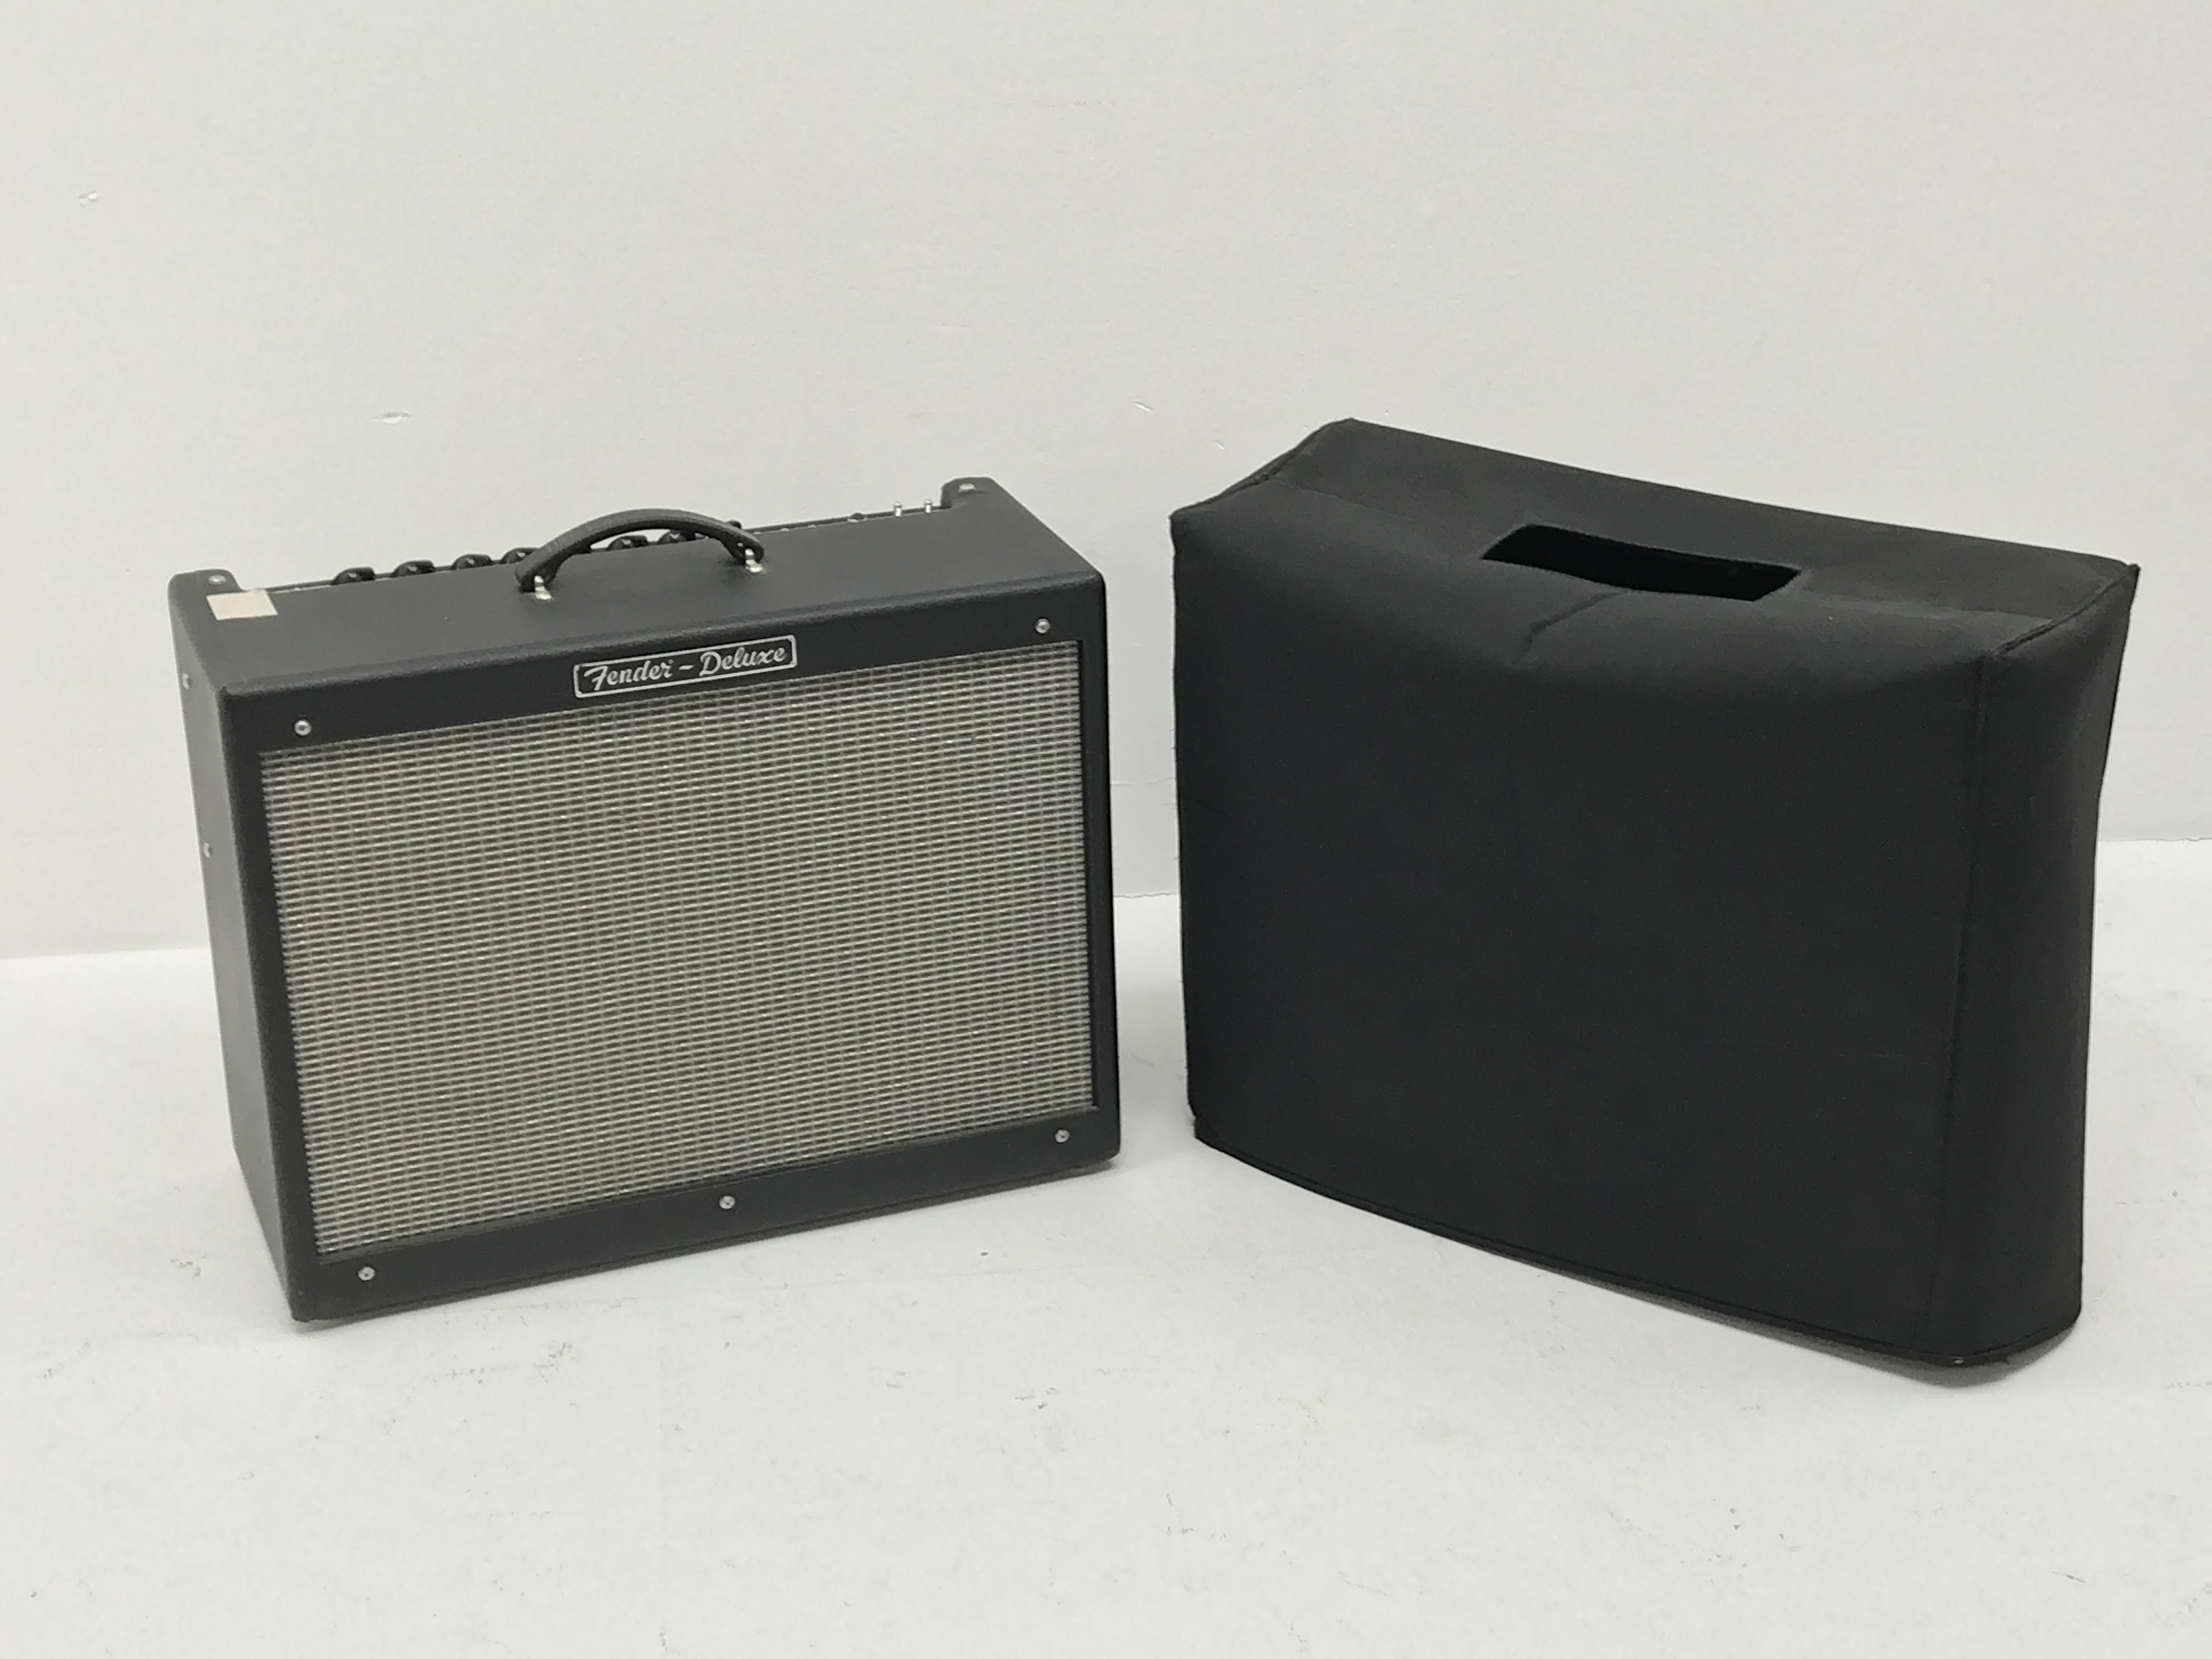 Fender Hot Rod Deluxe guitar amplifier Type PR-246, serial no. B-006445, made in U.S.A. - Image 3 of 4